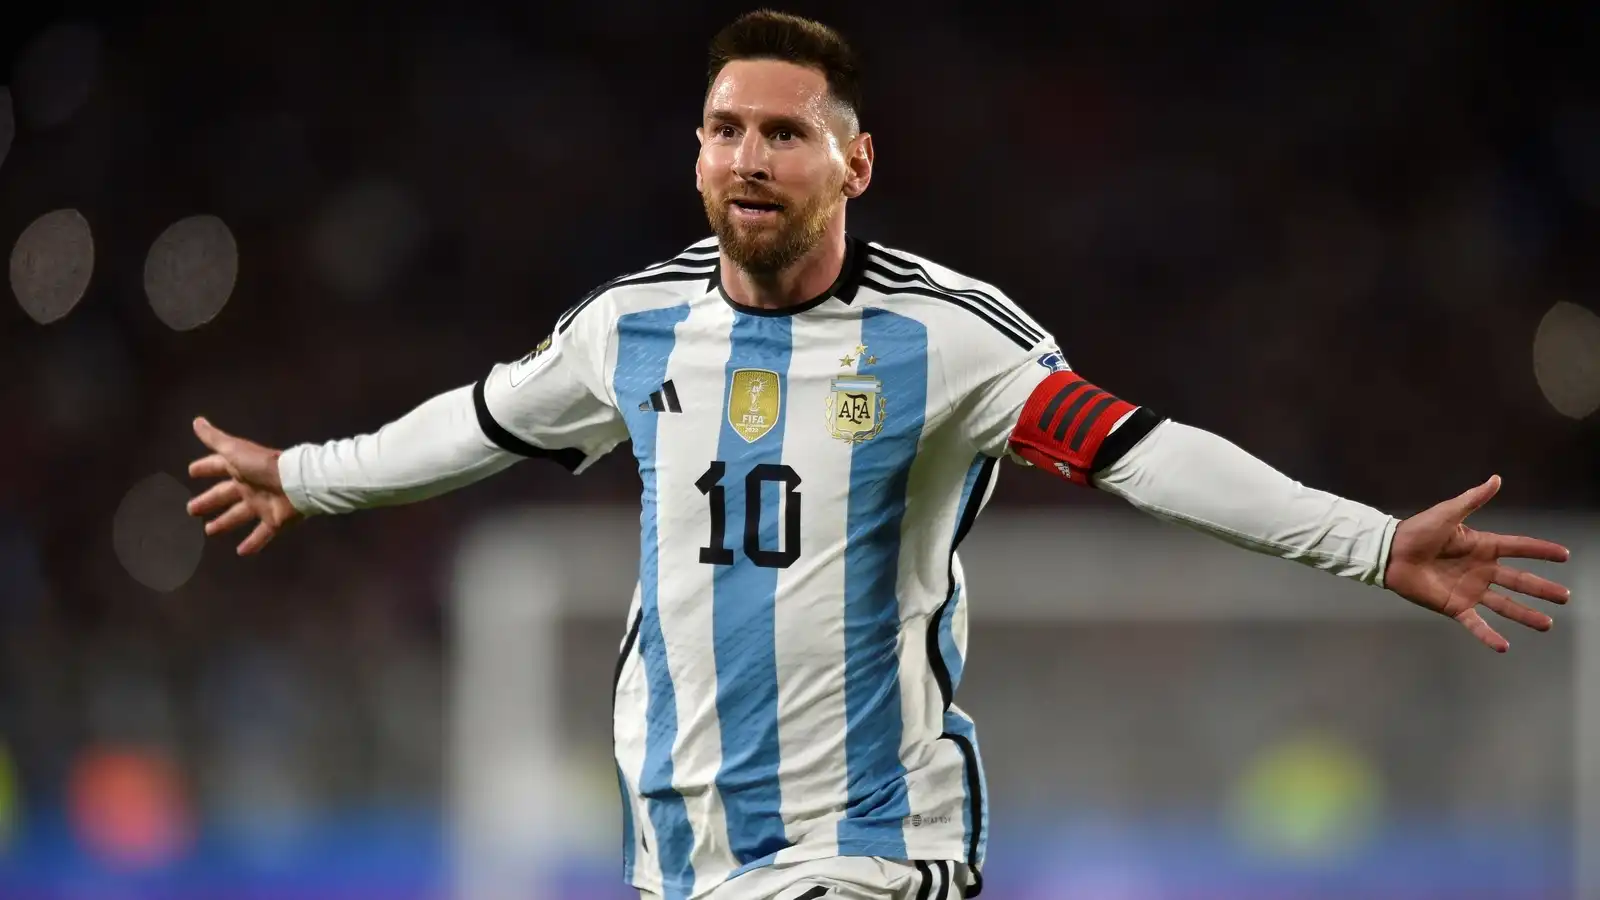 Lionel Messi attracts large crowd at Soldier Field for Argentina vs Ecuador soccer match